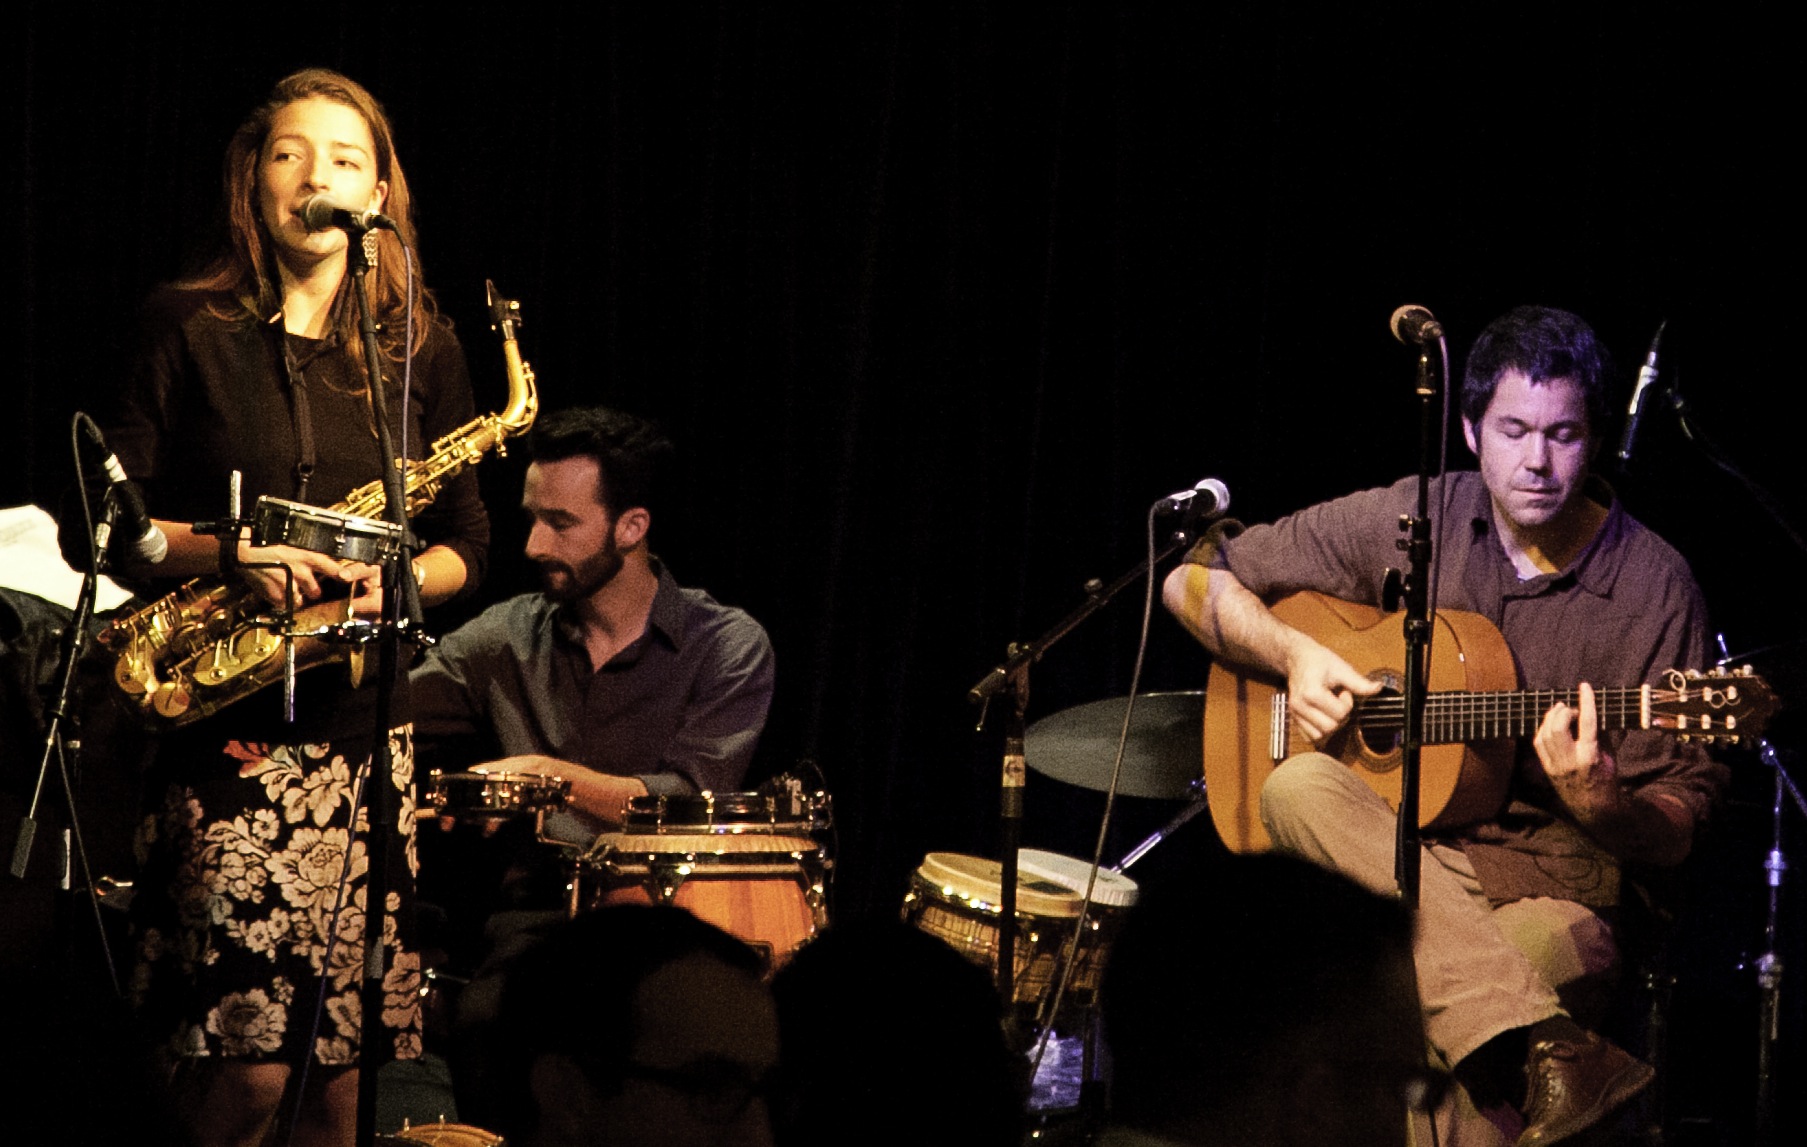 Maracujá plays the Royal Room in Columbia City, Seattle, December 5, 2014